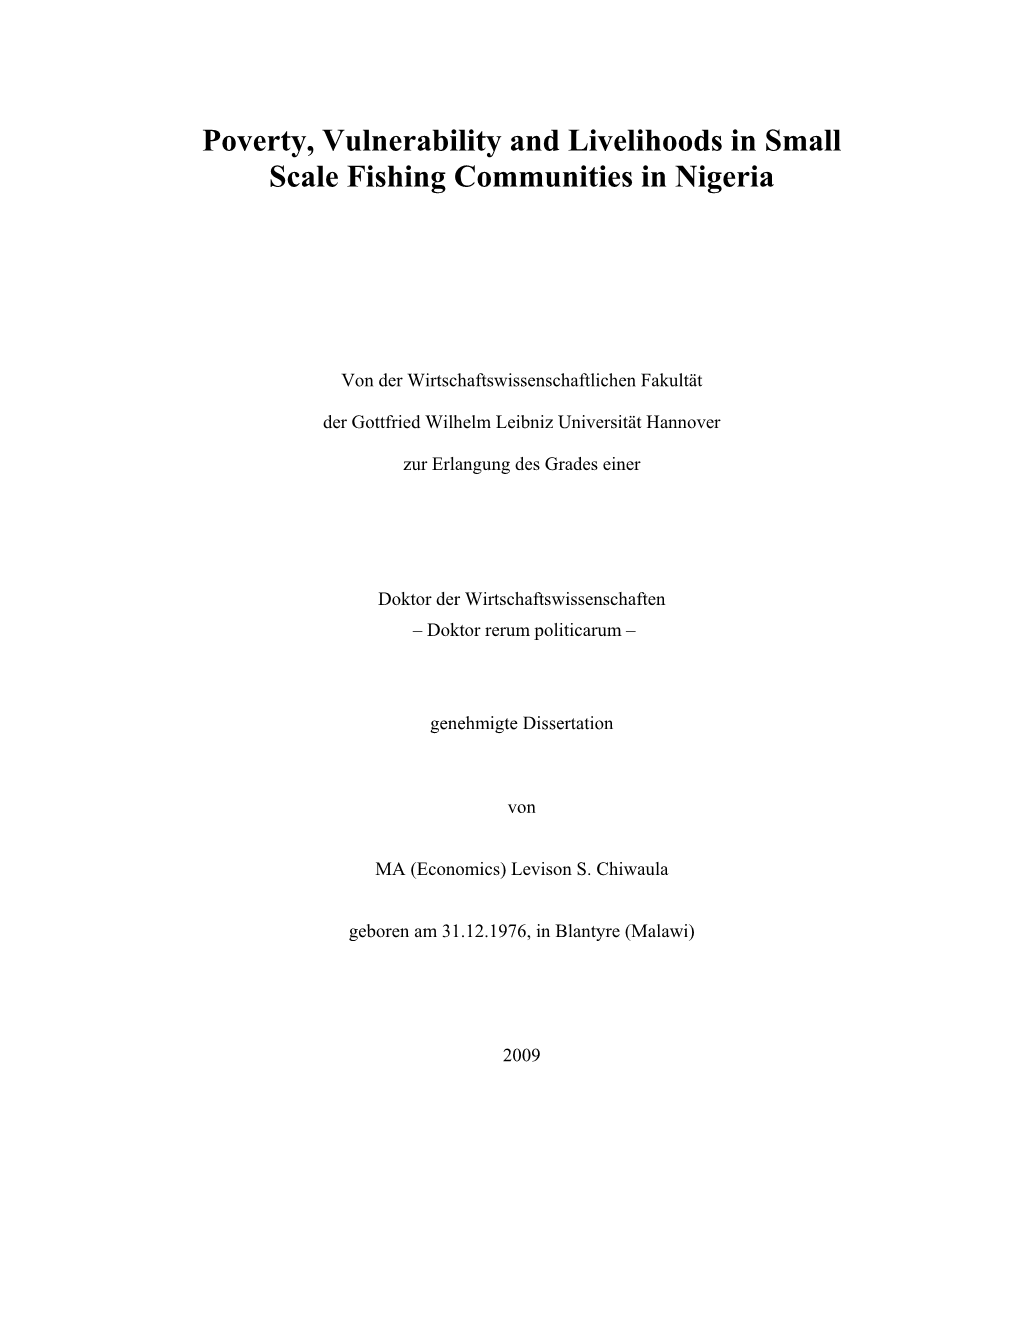 Poverty, Vulnerability and Livelihoods in Small Scale Fishing Communities in Nigeria